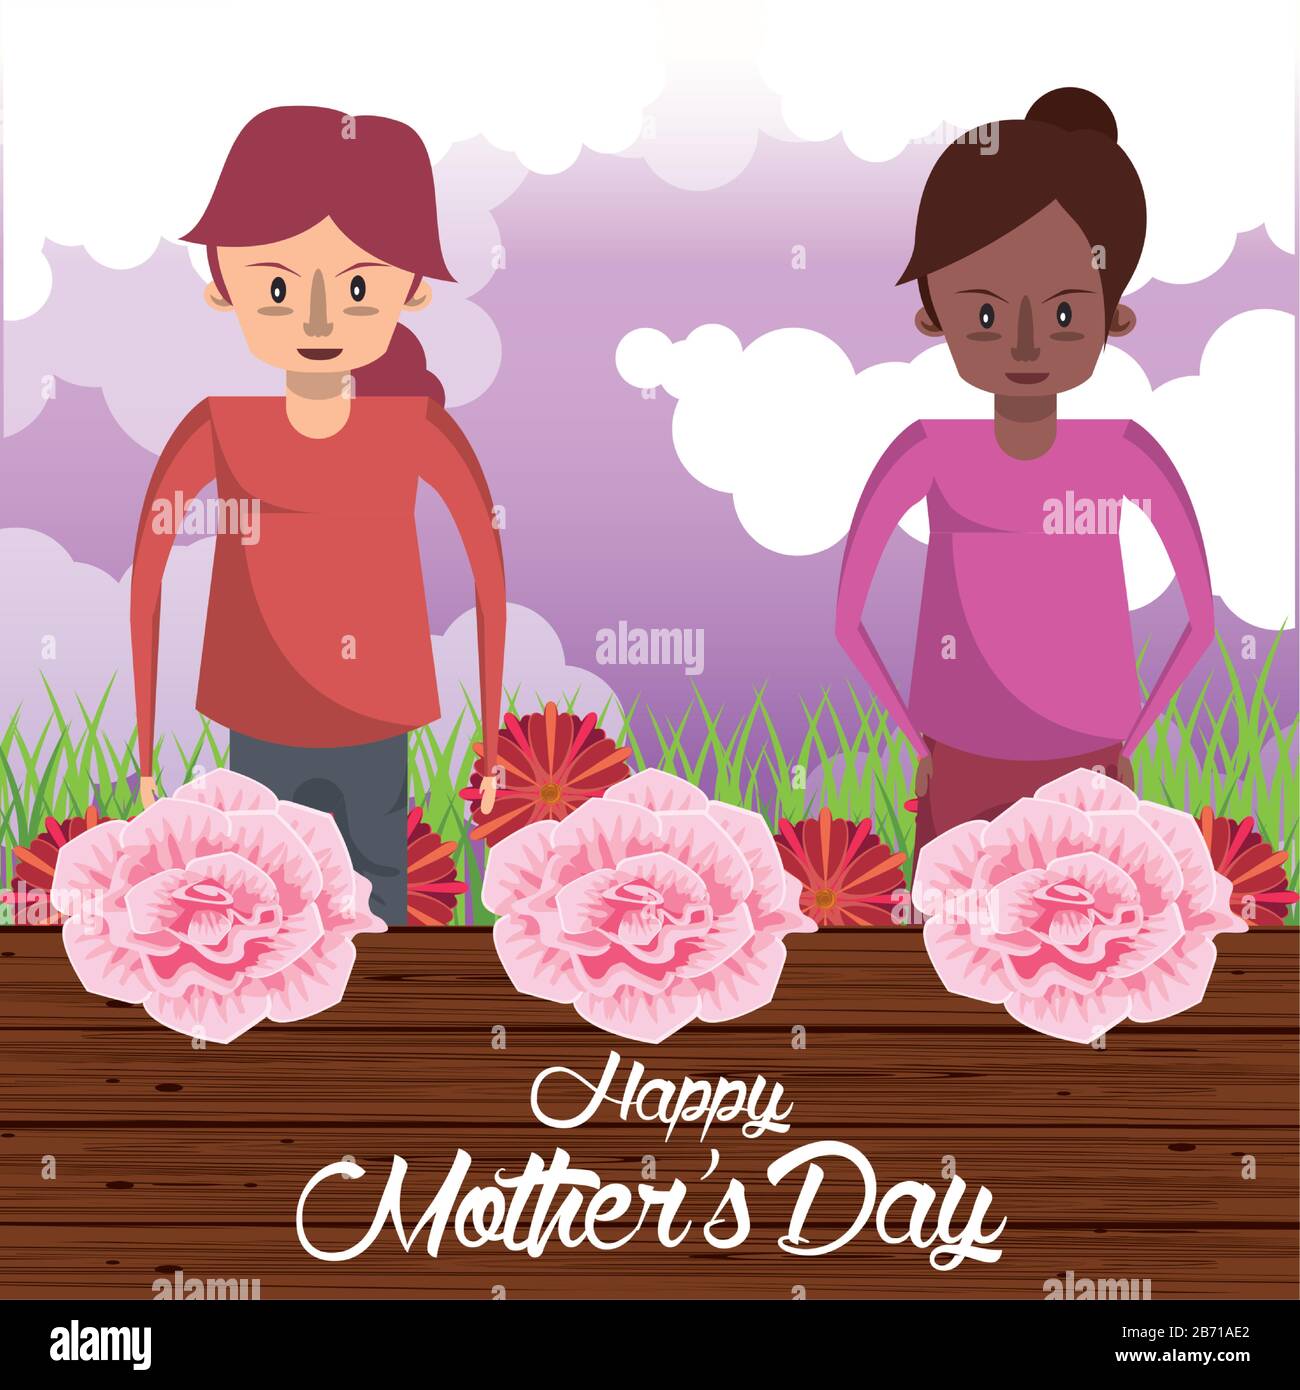 happy mothers day interracial hd sex photo